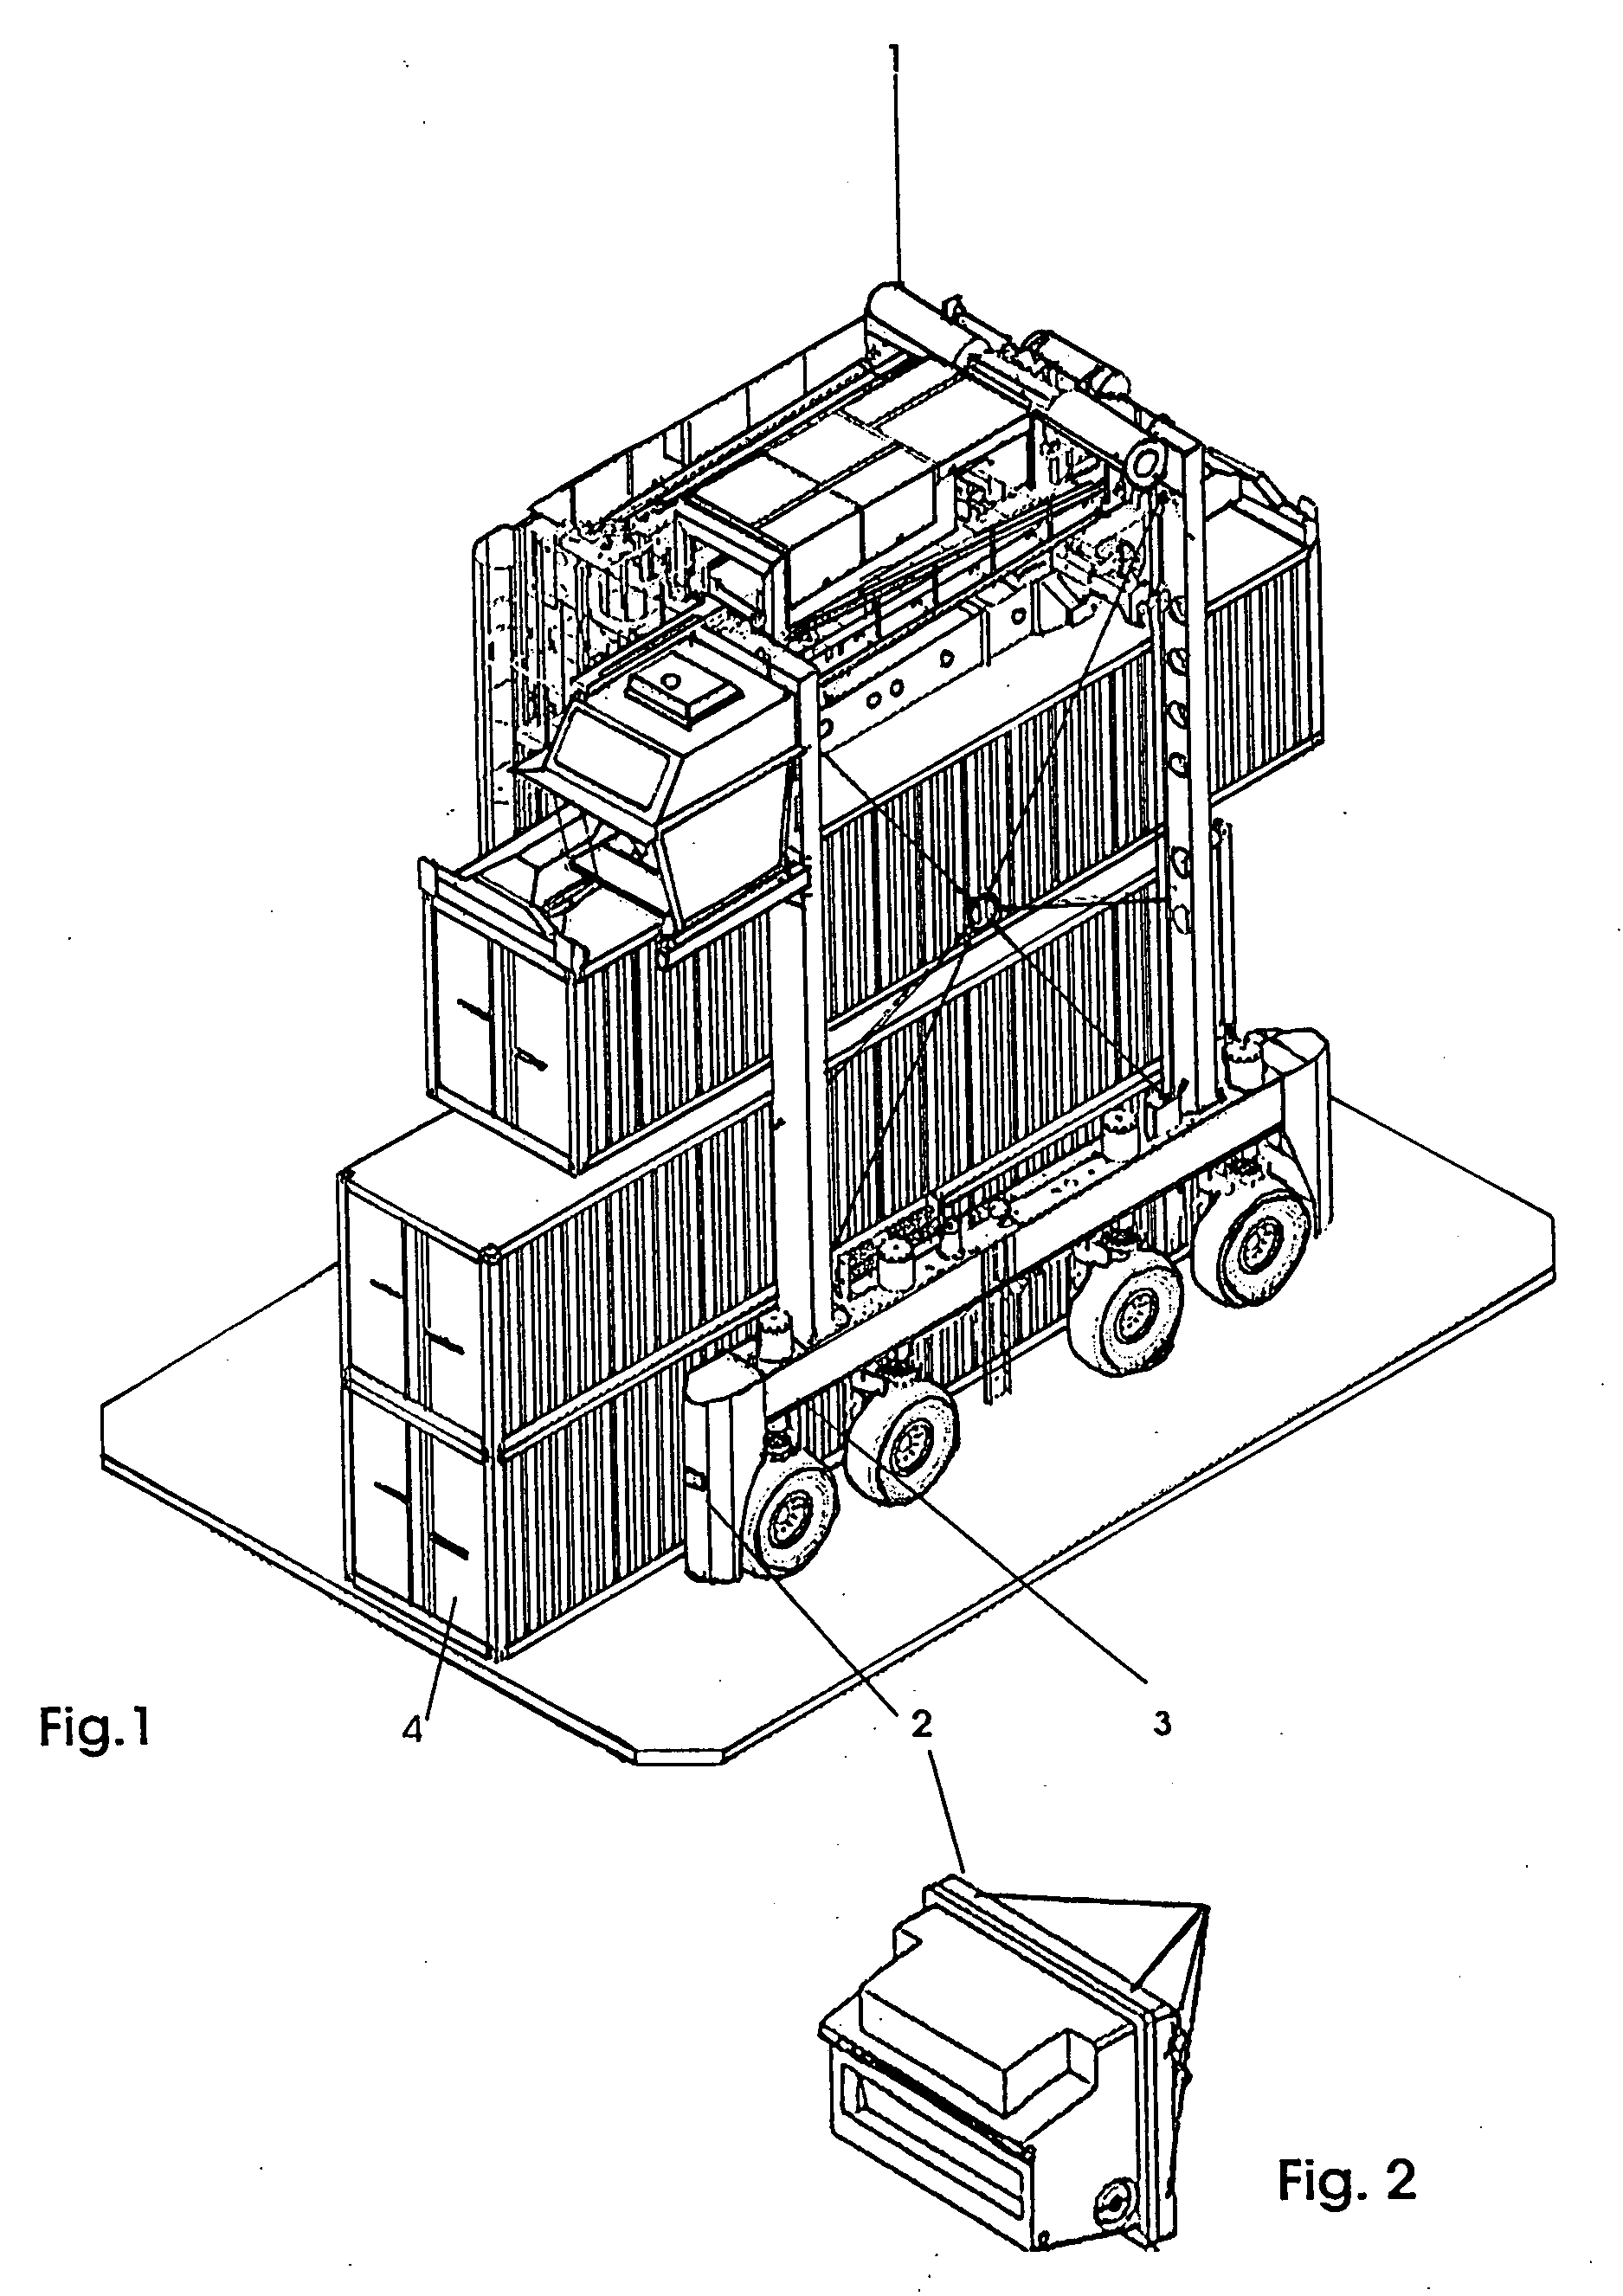 Fully automatic straddle carrier with local radio detection and laser steering